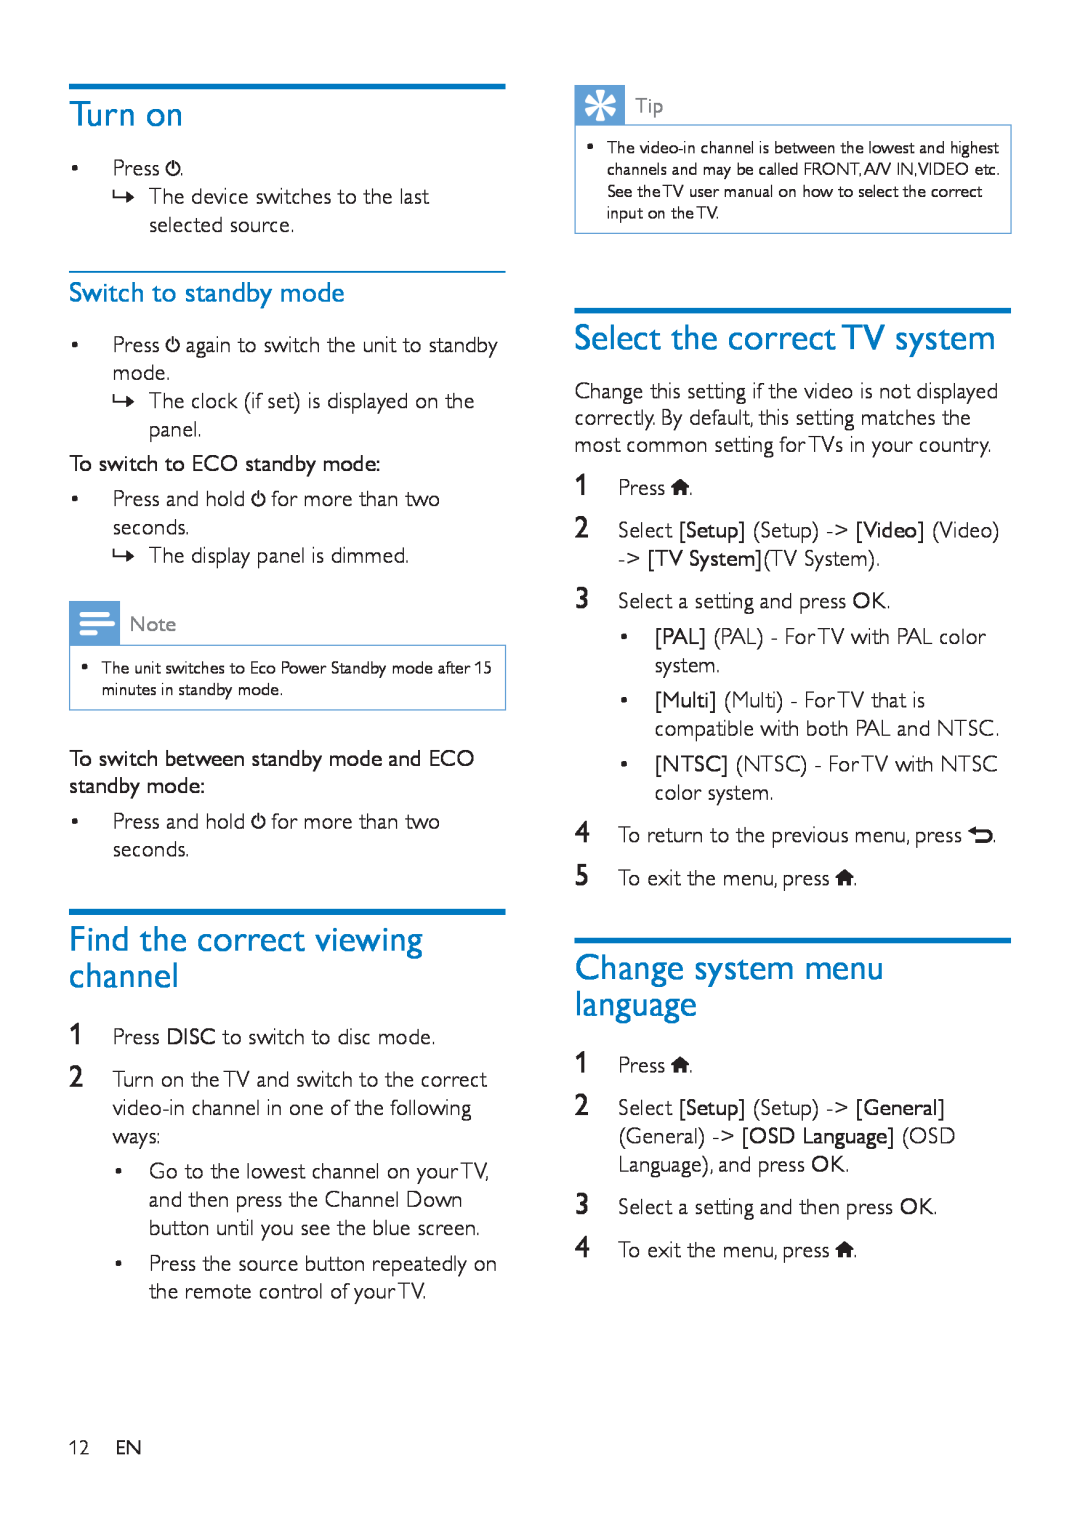 Philips MCD5110 Turn on, Find the correct viewing channel, Select the correct TV system, Change system menu language 